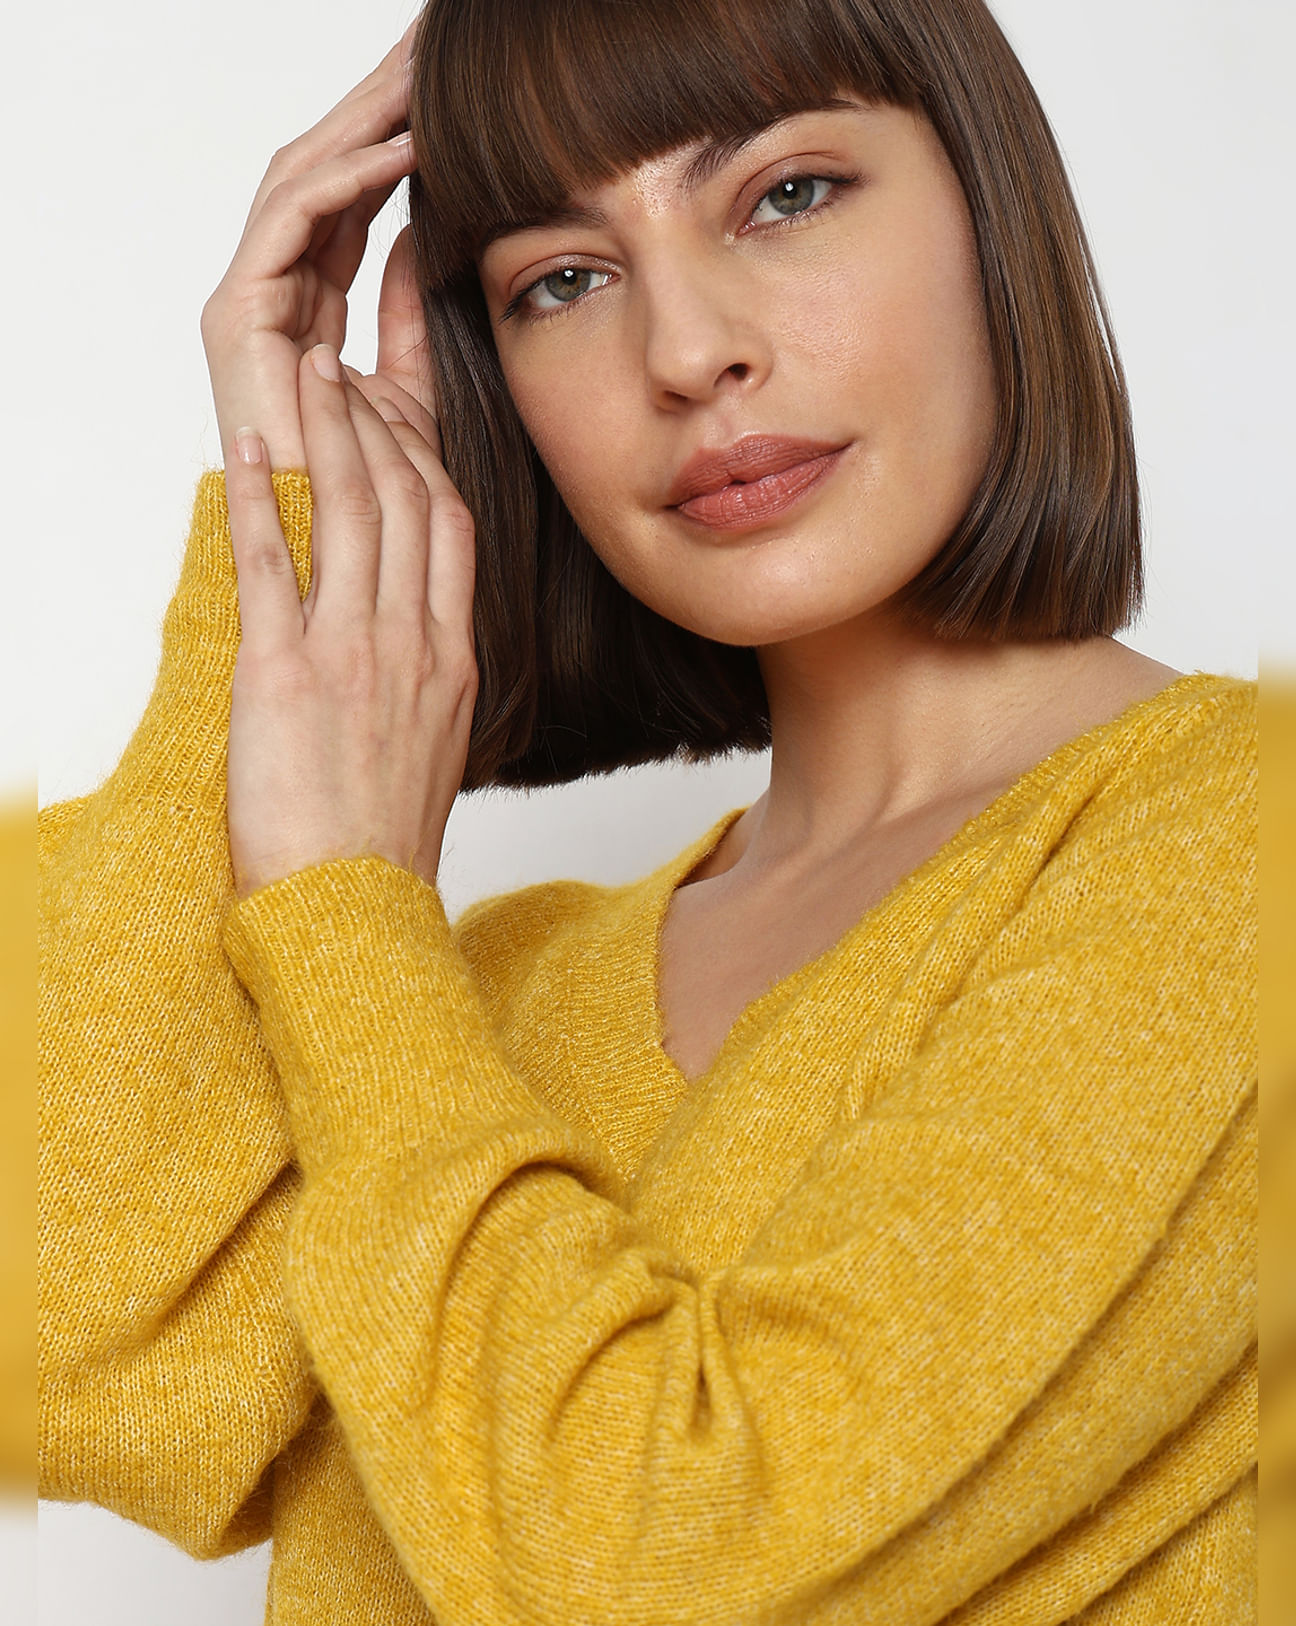 Yellow V-Neck Pullover